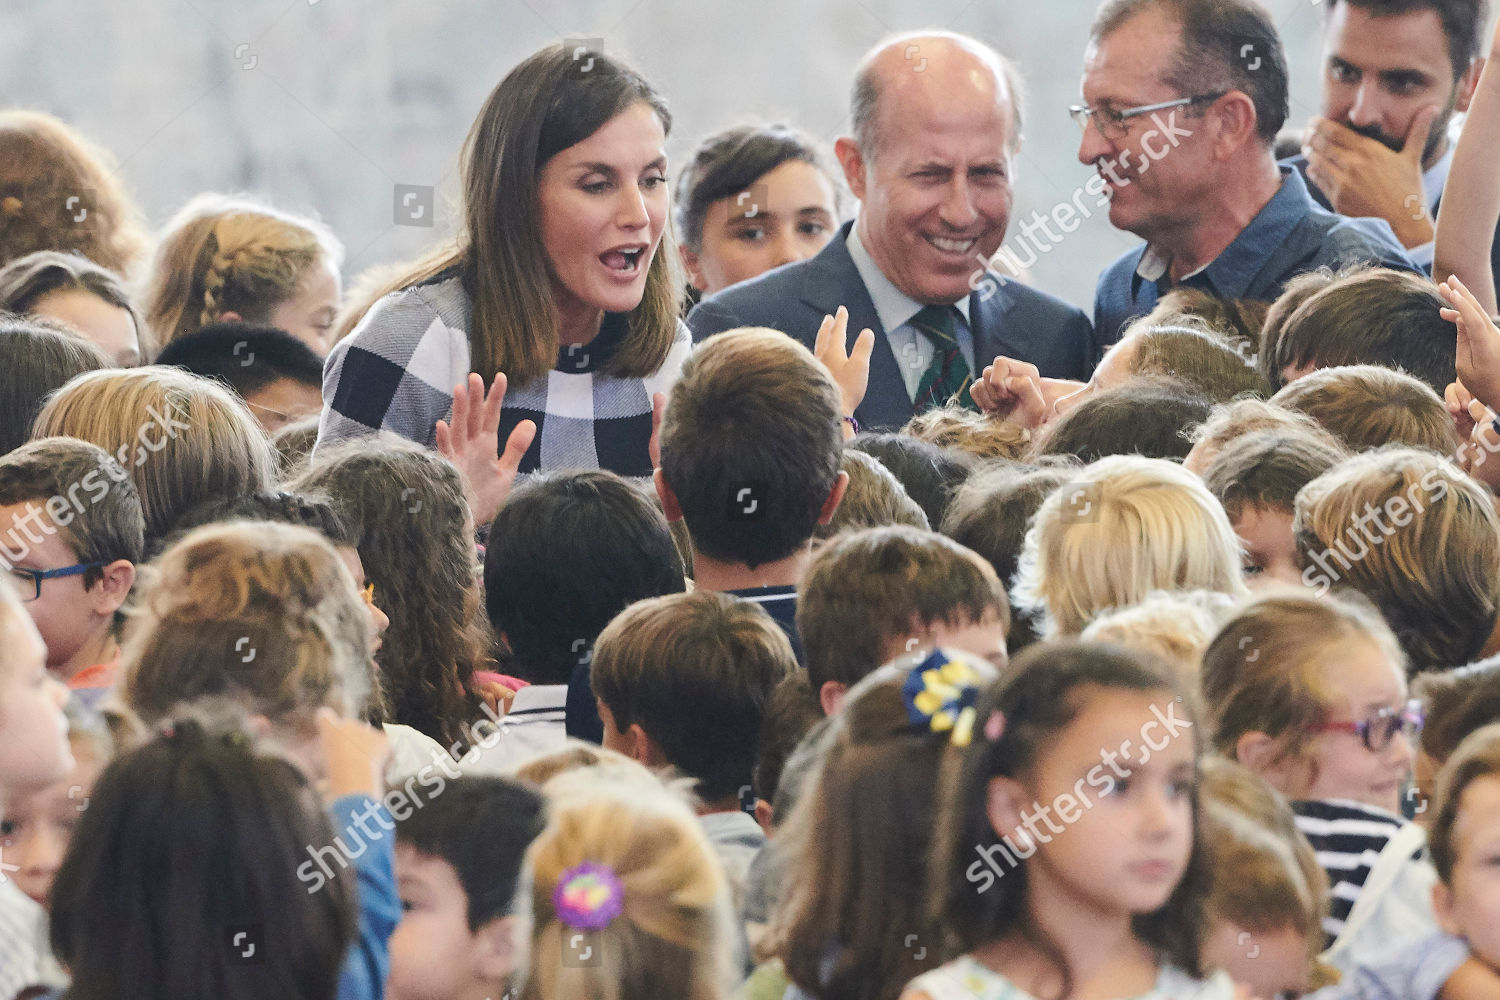 queen-letizia-attends-the-opening-of-the-school-year-oviedo-spain-shutterstock-editorial-9880182ae.jpg